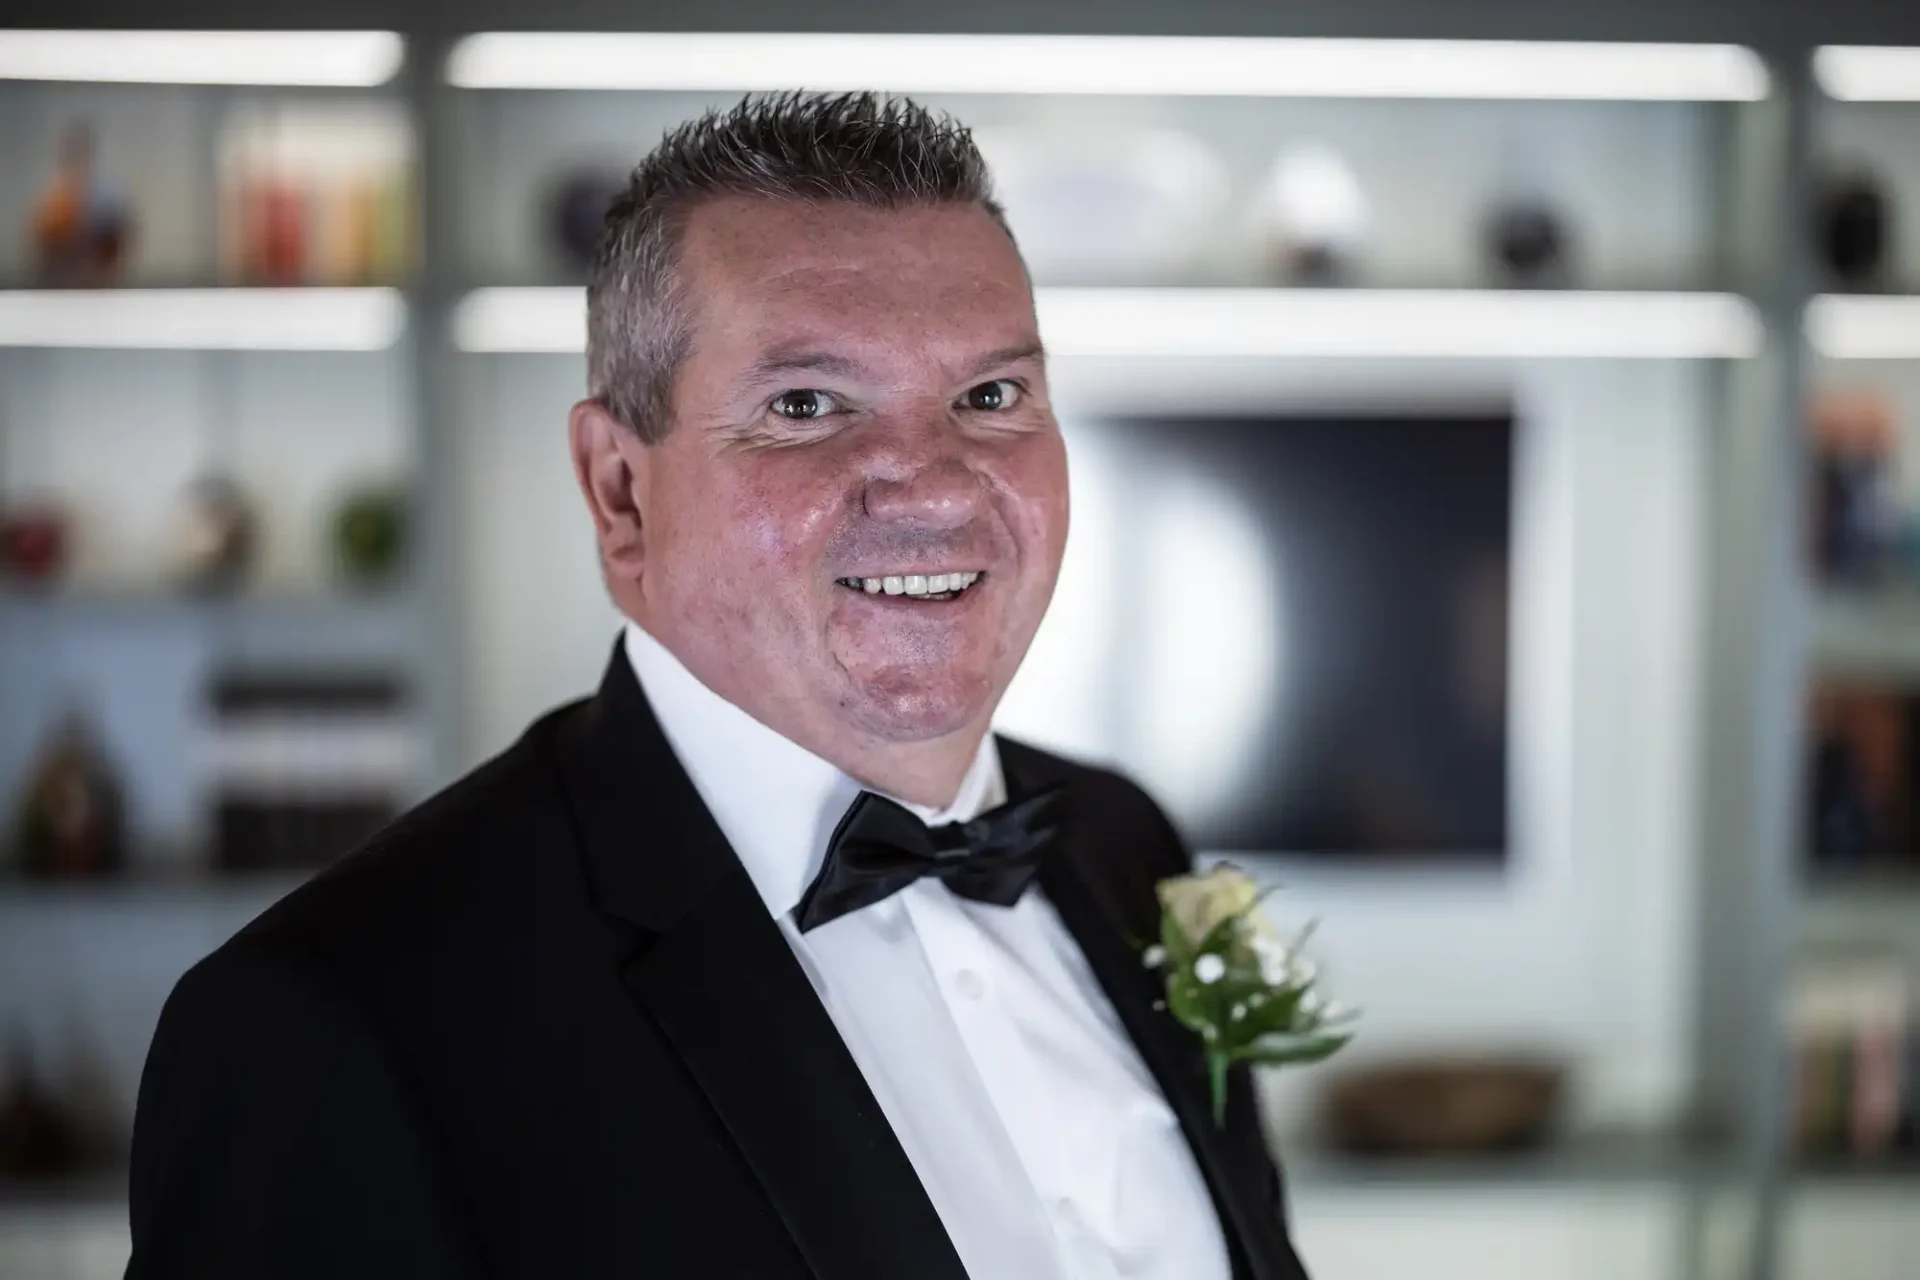 A smiling man in a tuxedo with a boutonniere, standing in a room with a blurry background featuring shelves and a tv.